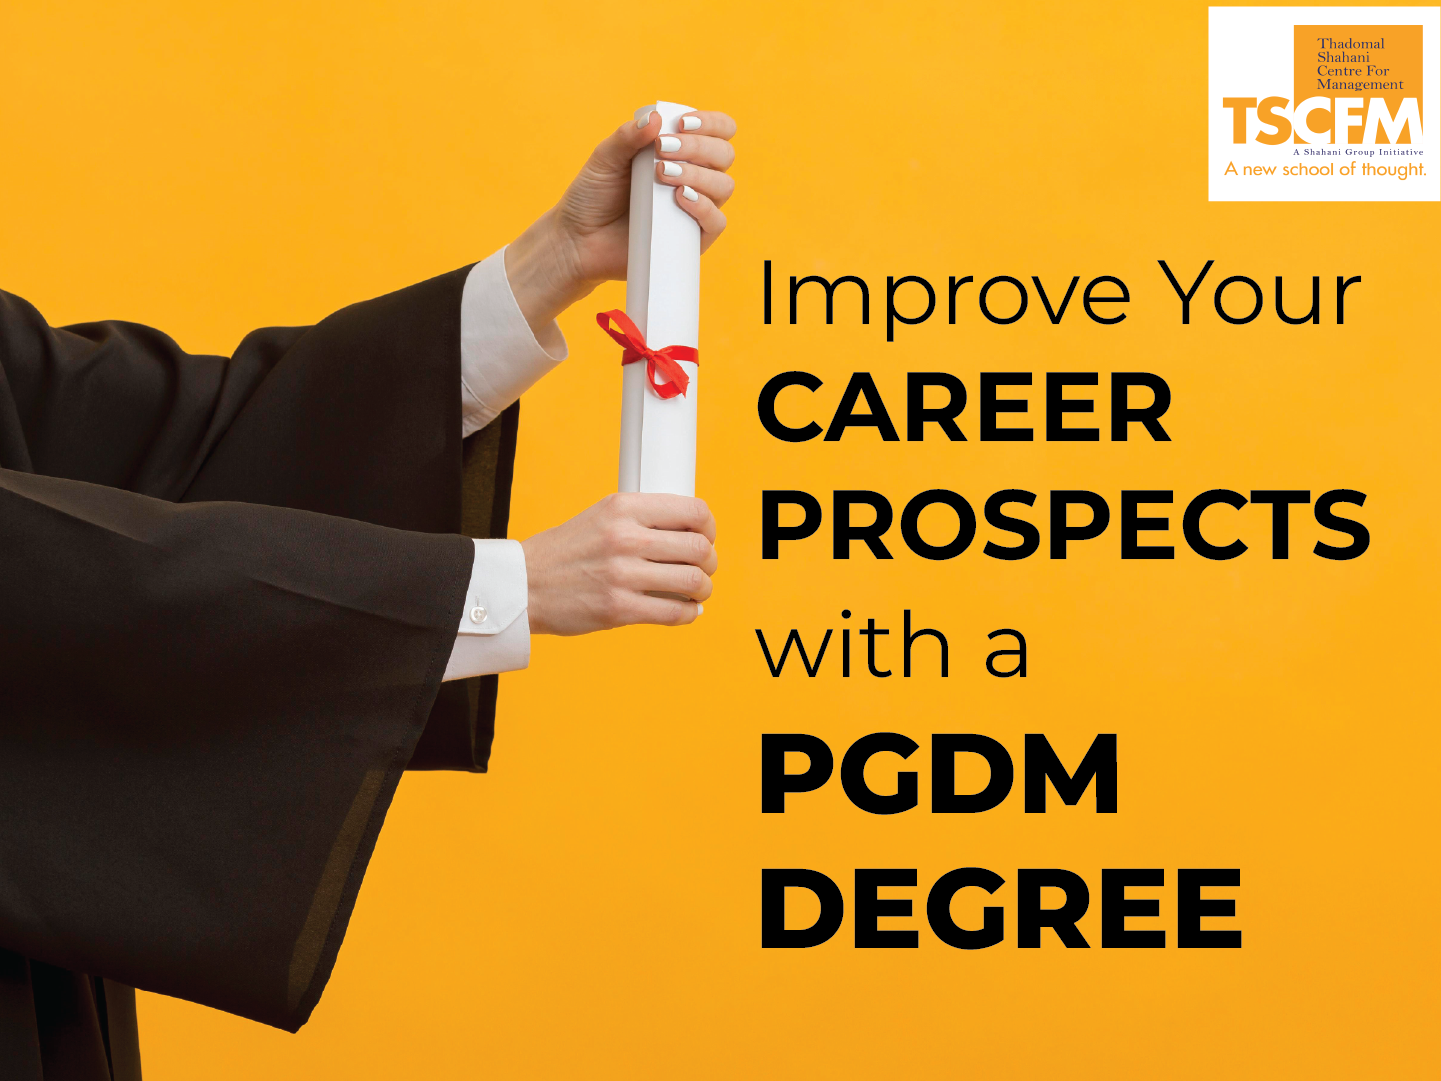 How to Improve Your Career Prospects with a PGDM Degree?